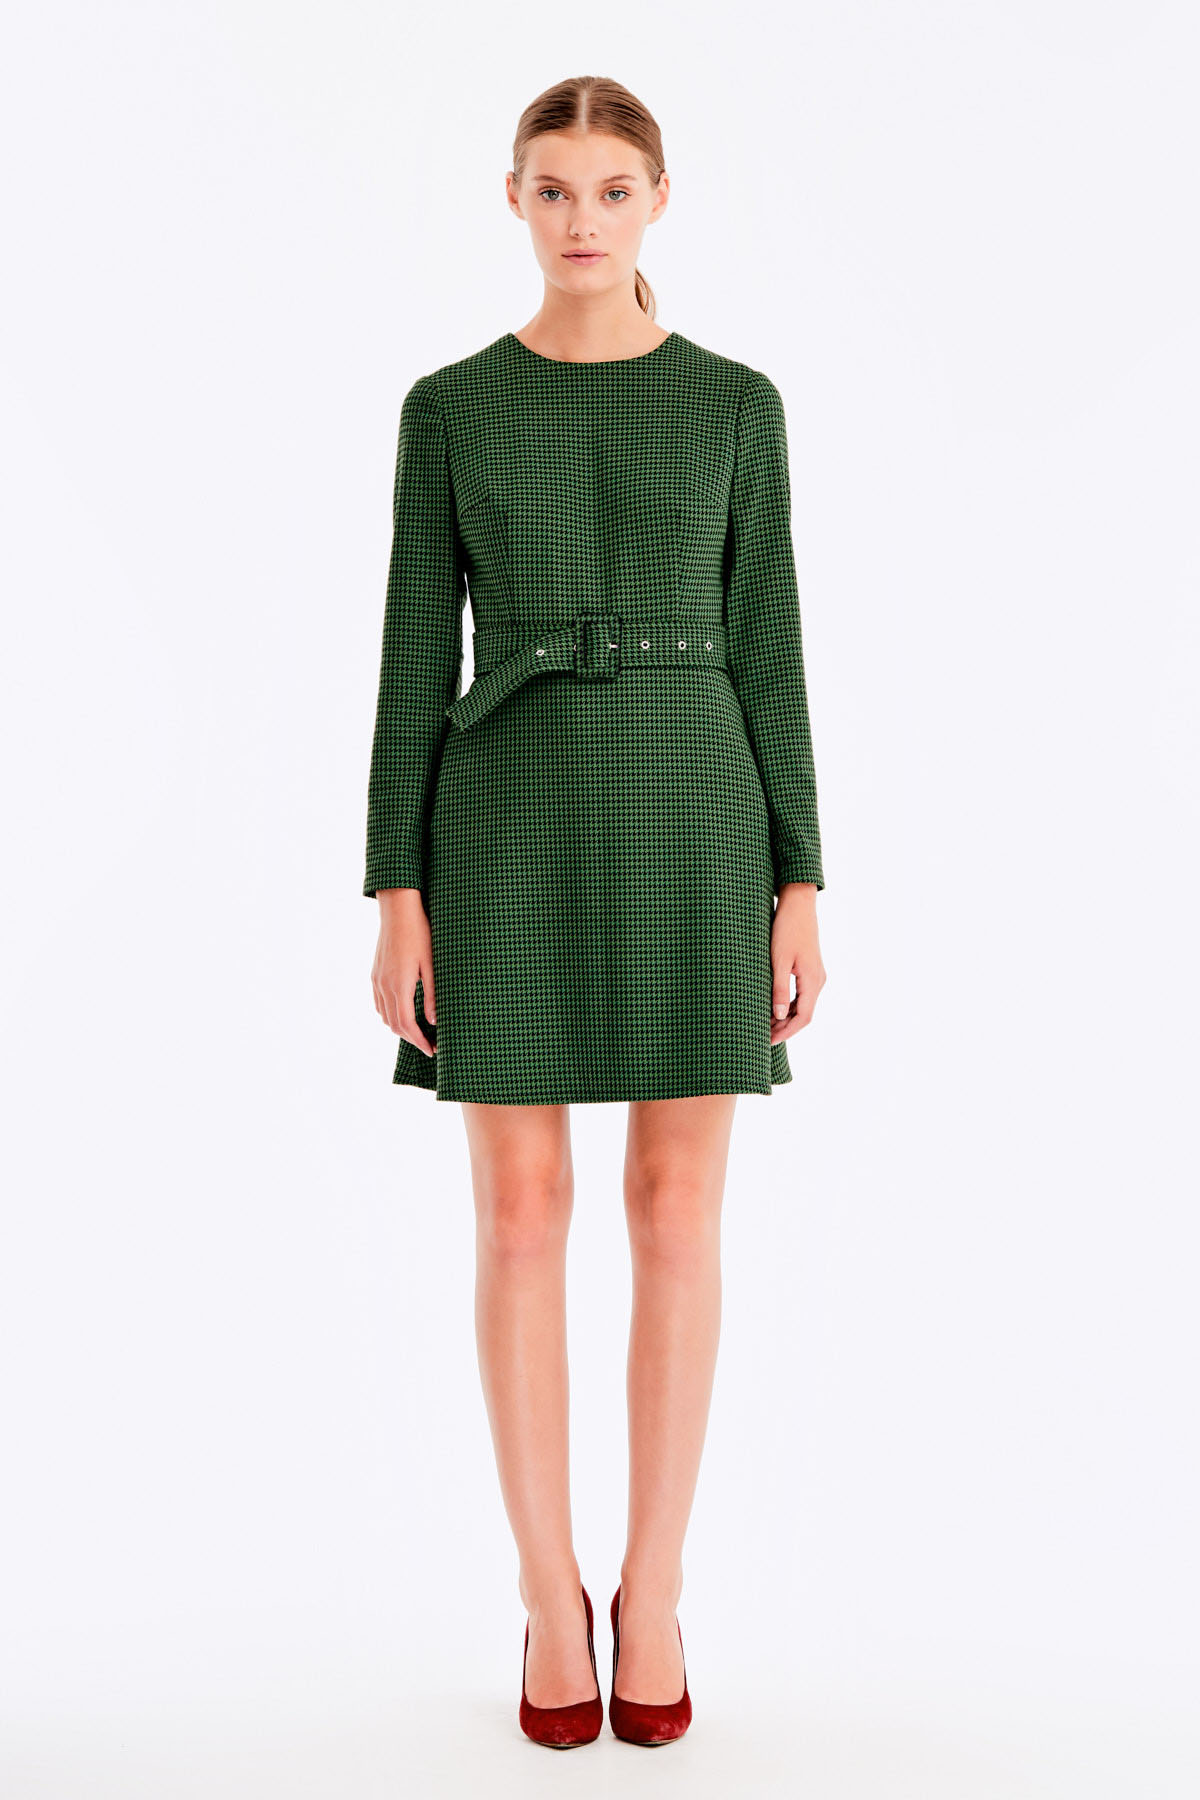 Green dress with a houndstooth print, photo 4